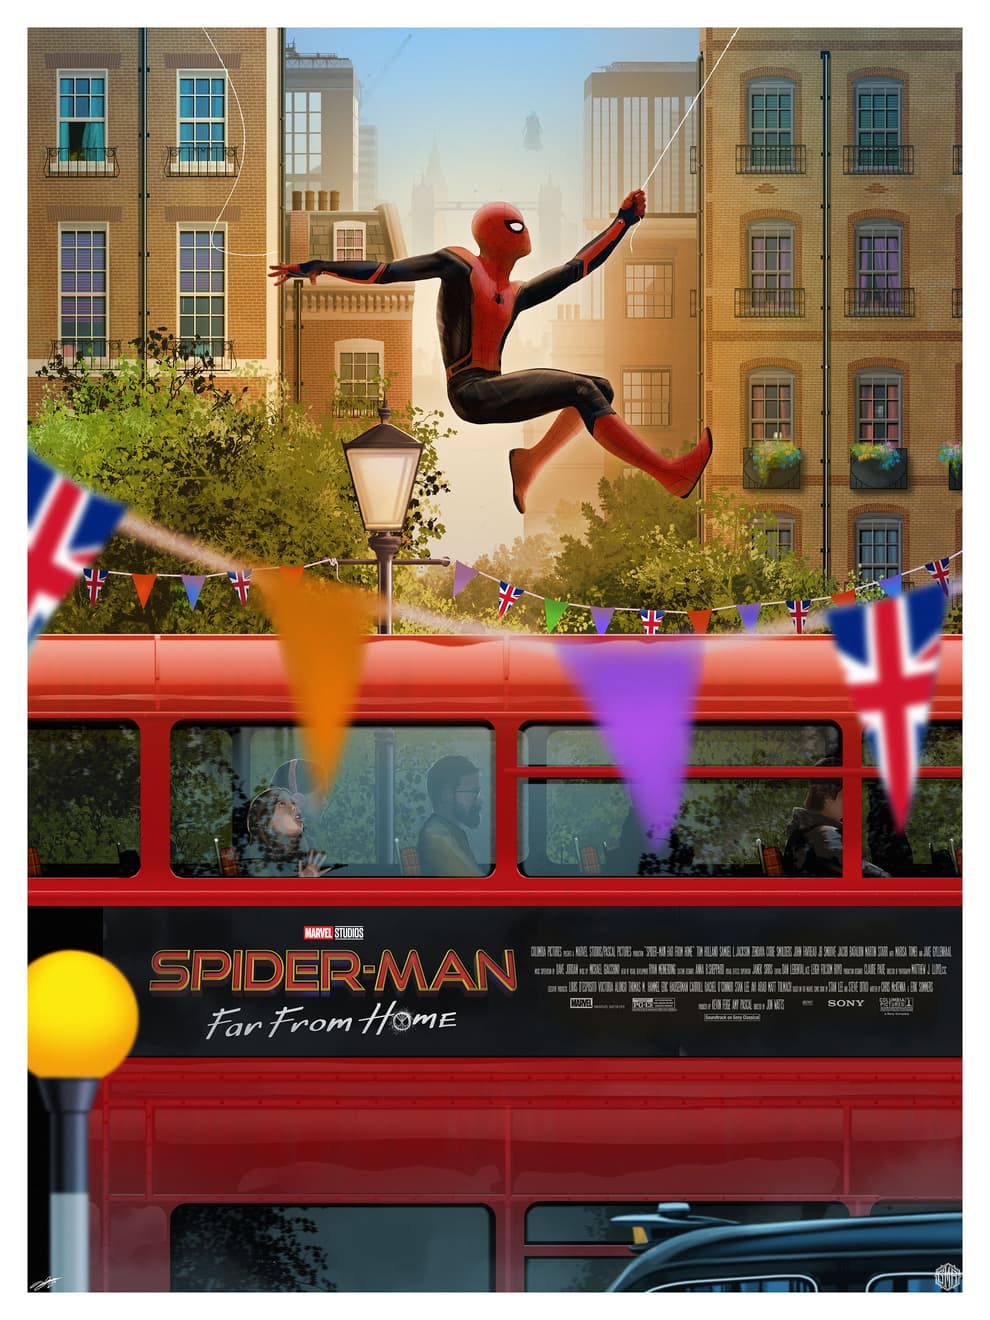 Spider-Man Far From Home by Andy Fairhurst